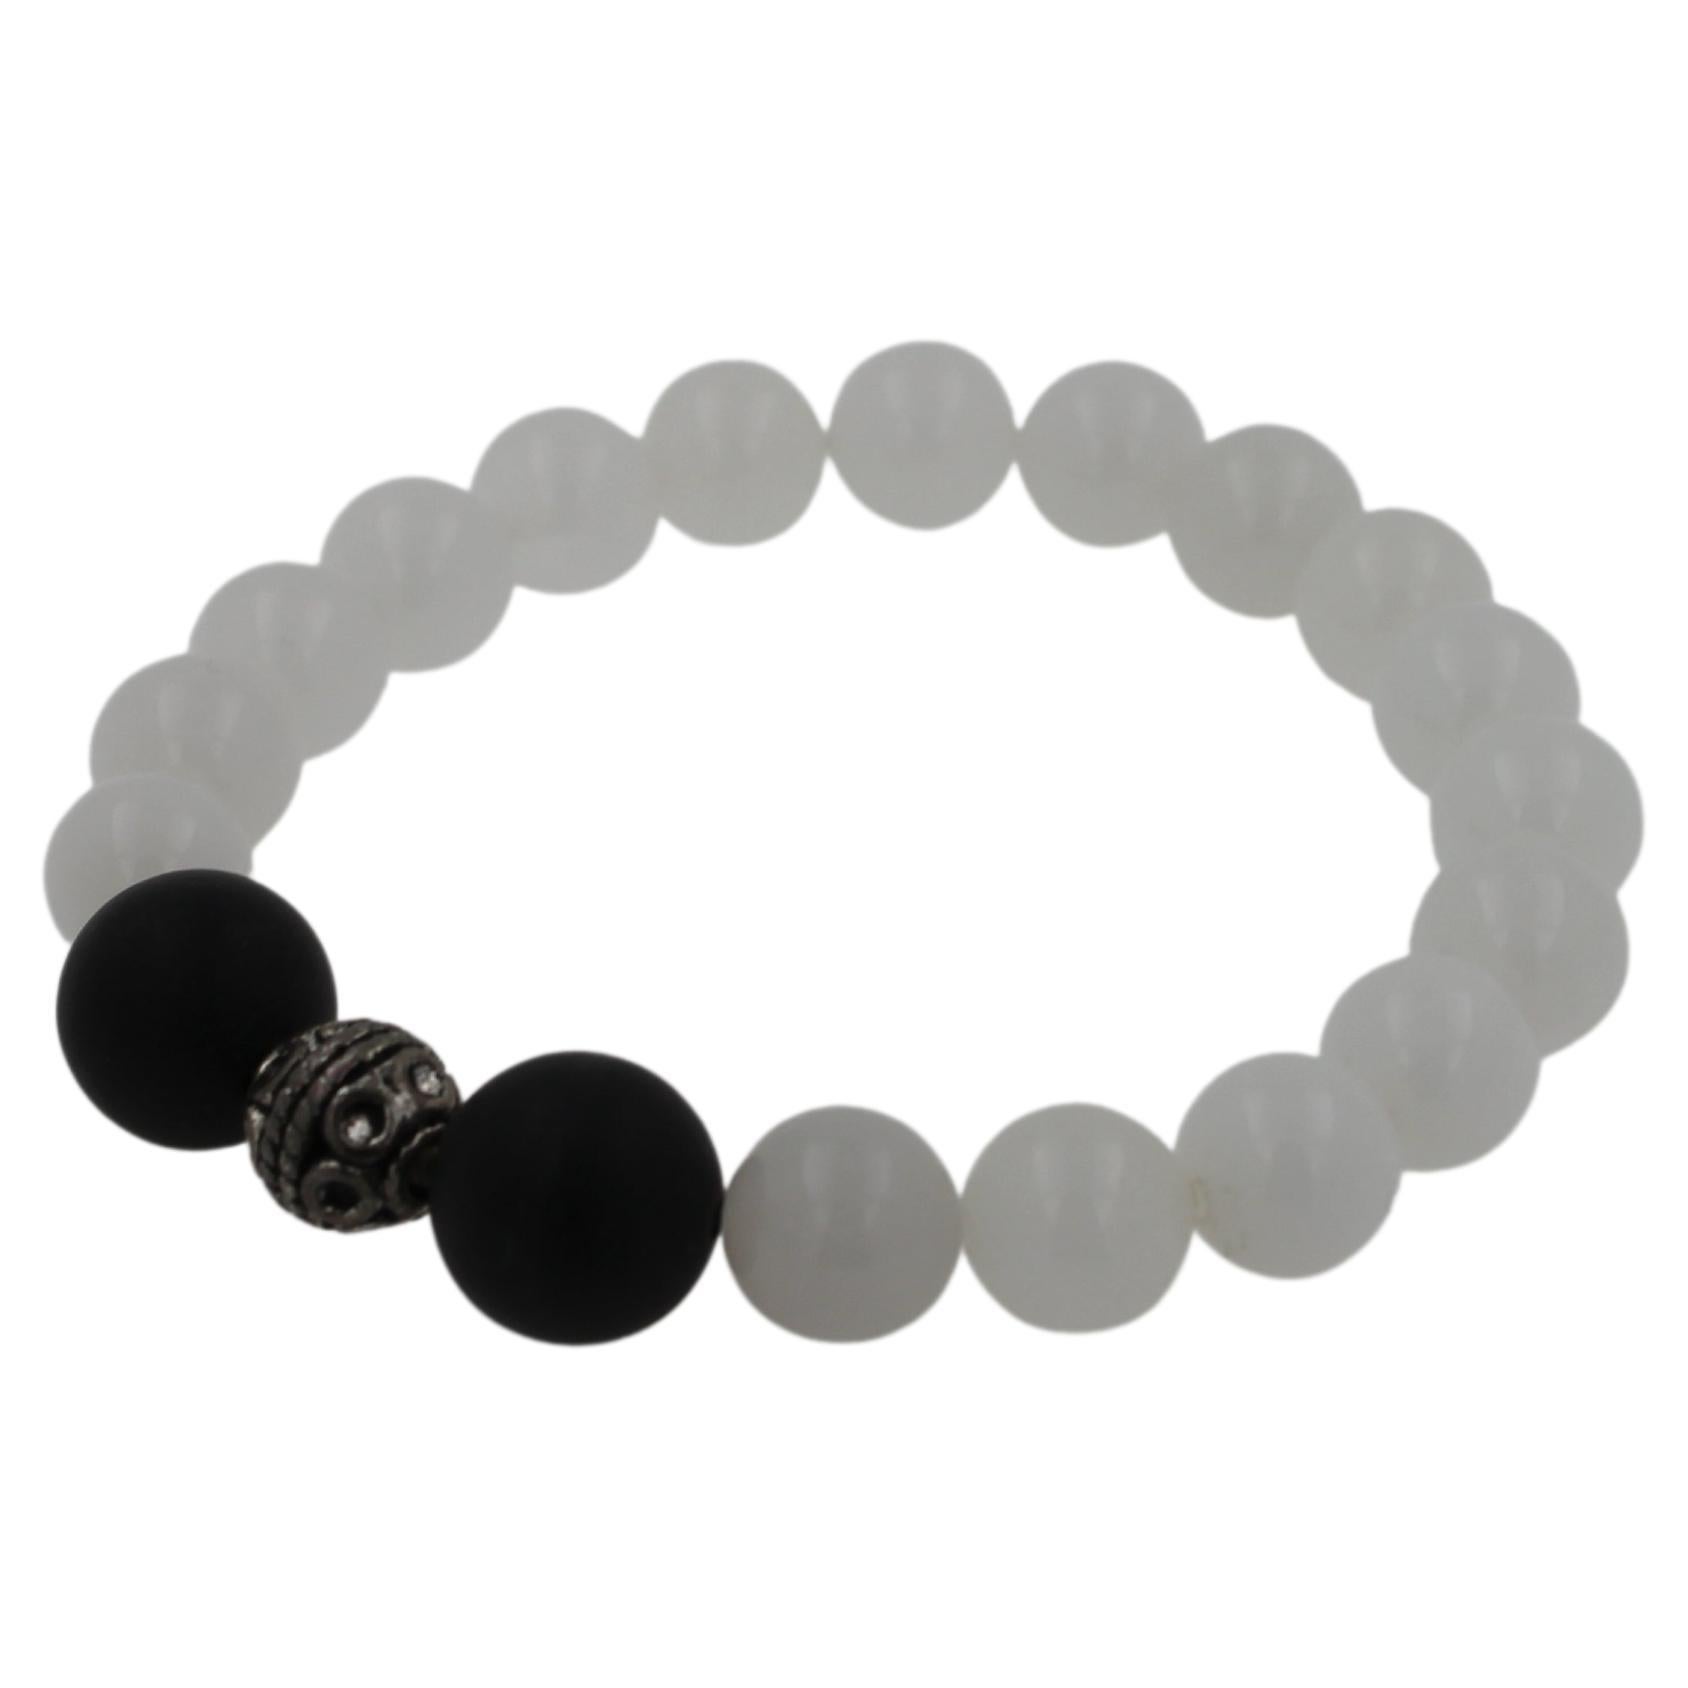 White Agate Black Onyx Round Bead Stretchy Unique Statement Circle Beads Chakra Bracelet
Size of Bracelet - Fits Wrist Sizes of 6-9 Inches (Flexible Stretching Wire)
Natural, Genuine Gemstones